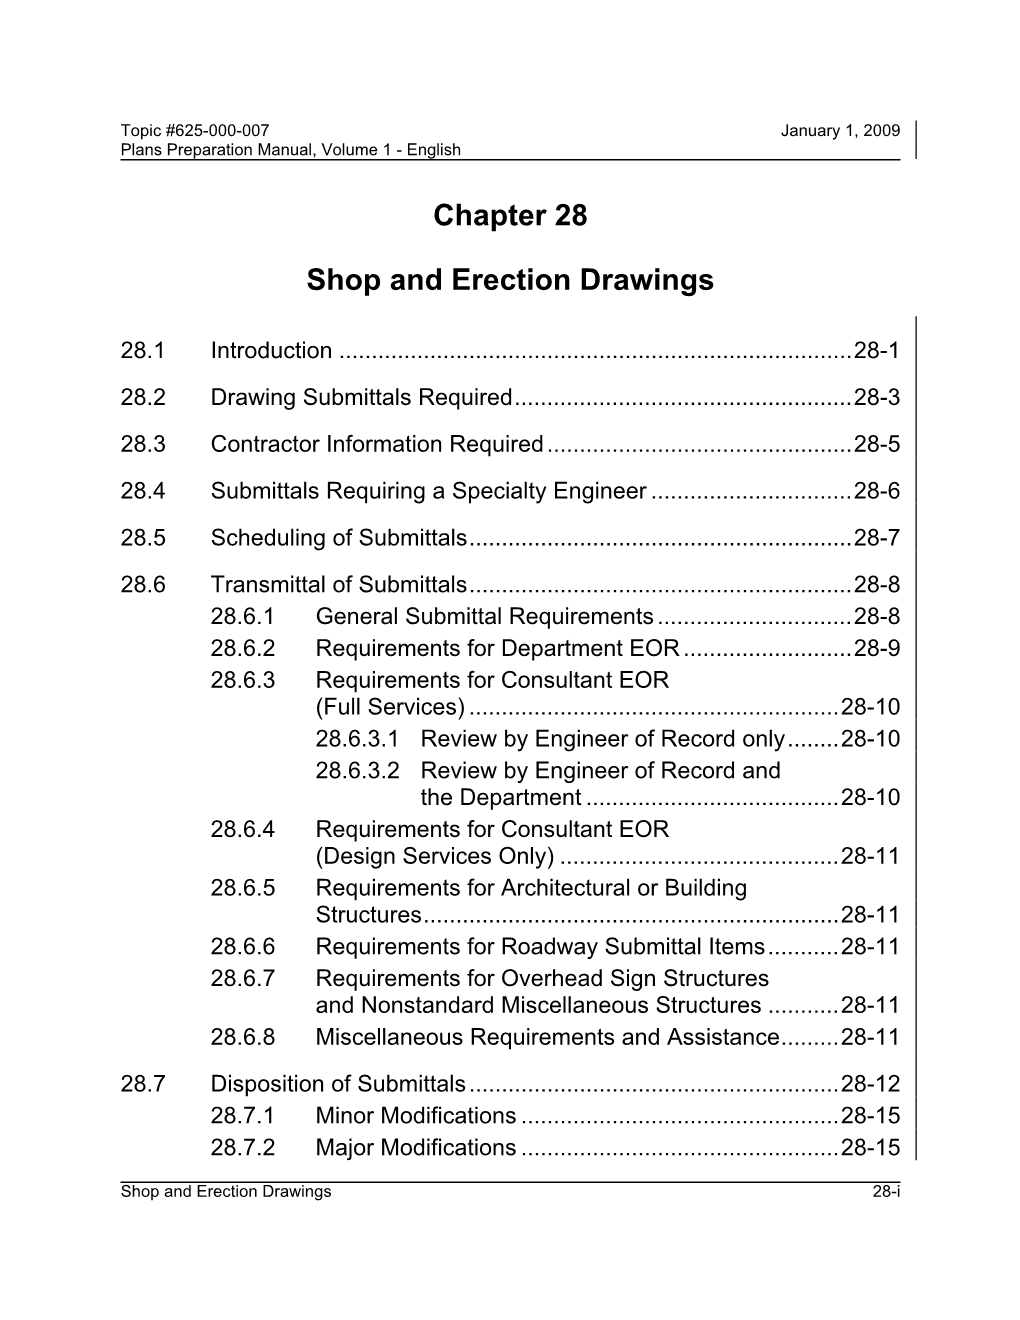 Chapter 28 Shop and Erection Drawings